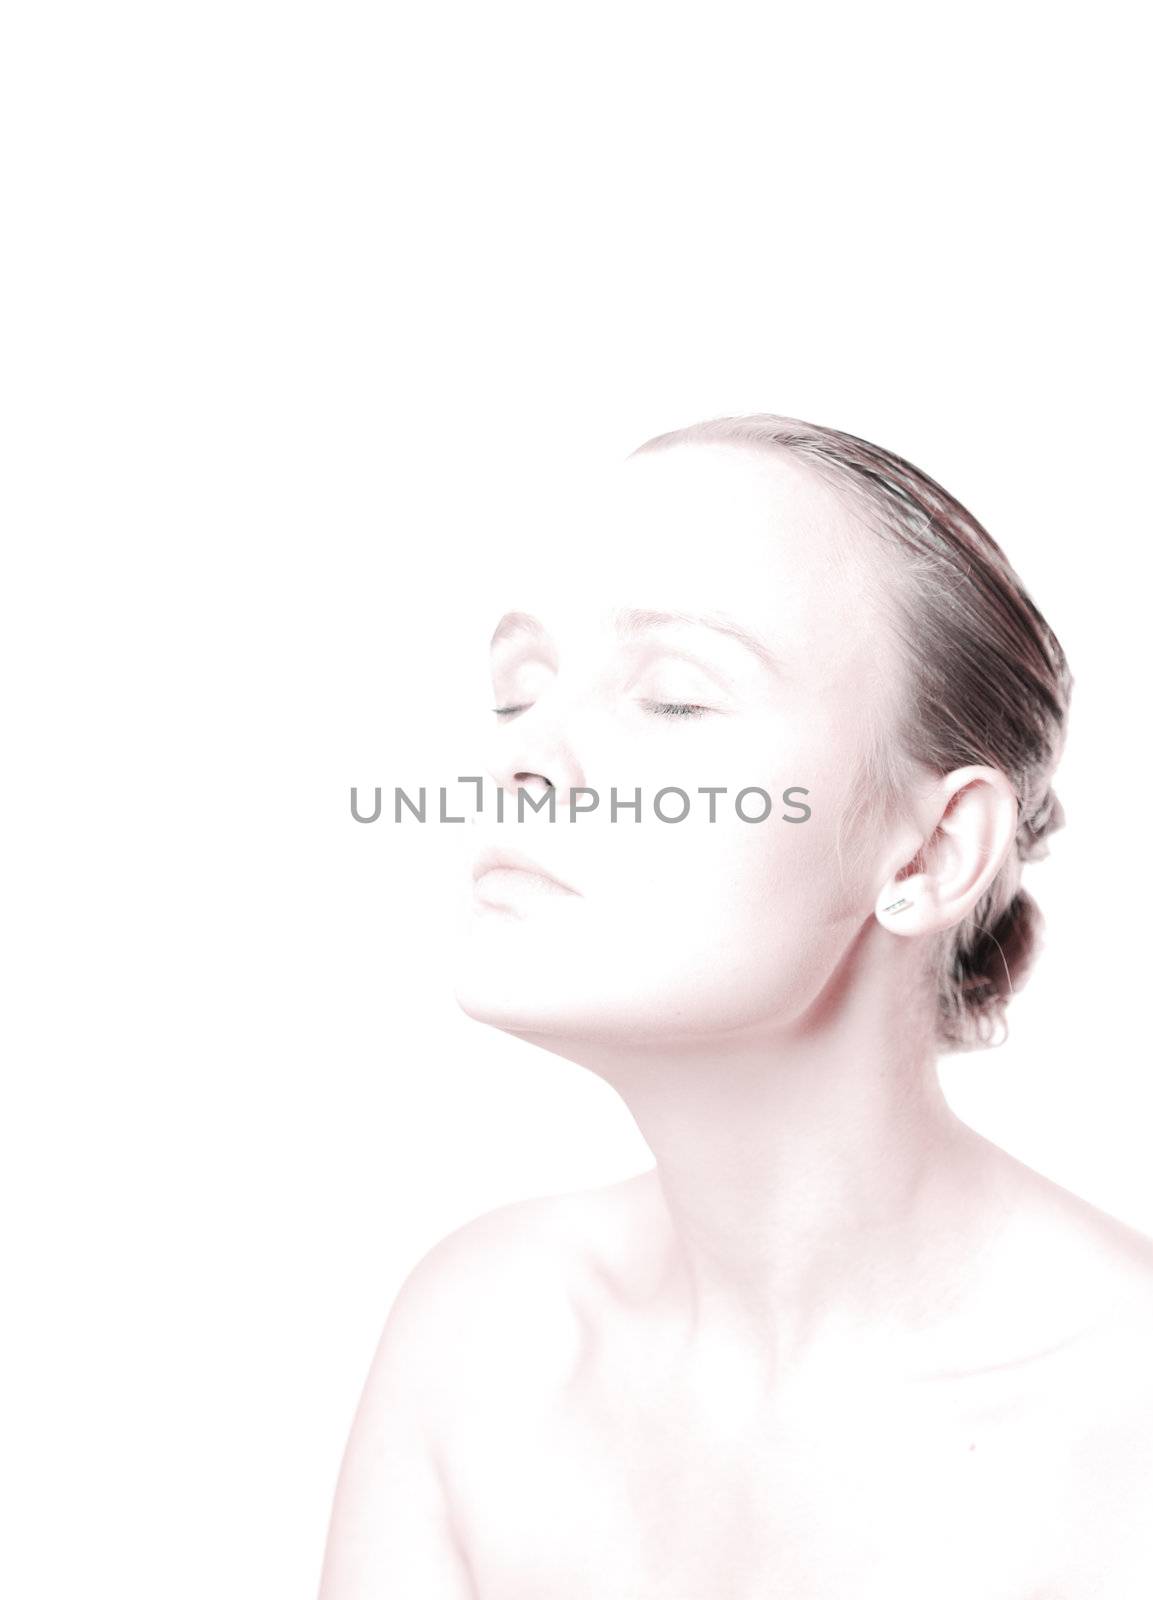 Overexposed portrait of a girl with technicolor correction and closed eyes. Space for text.